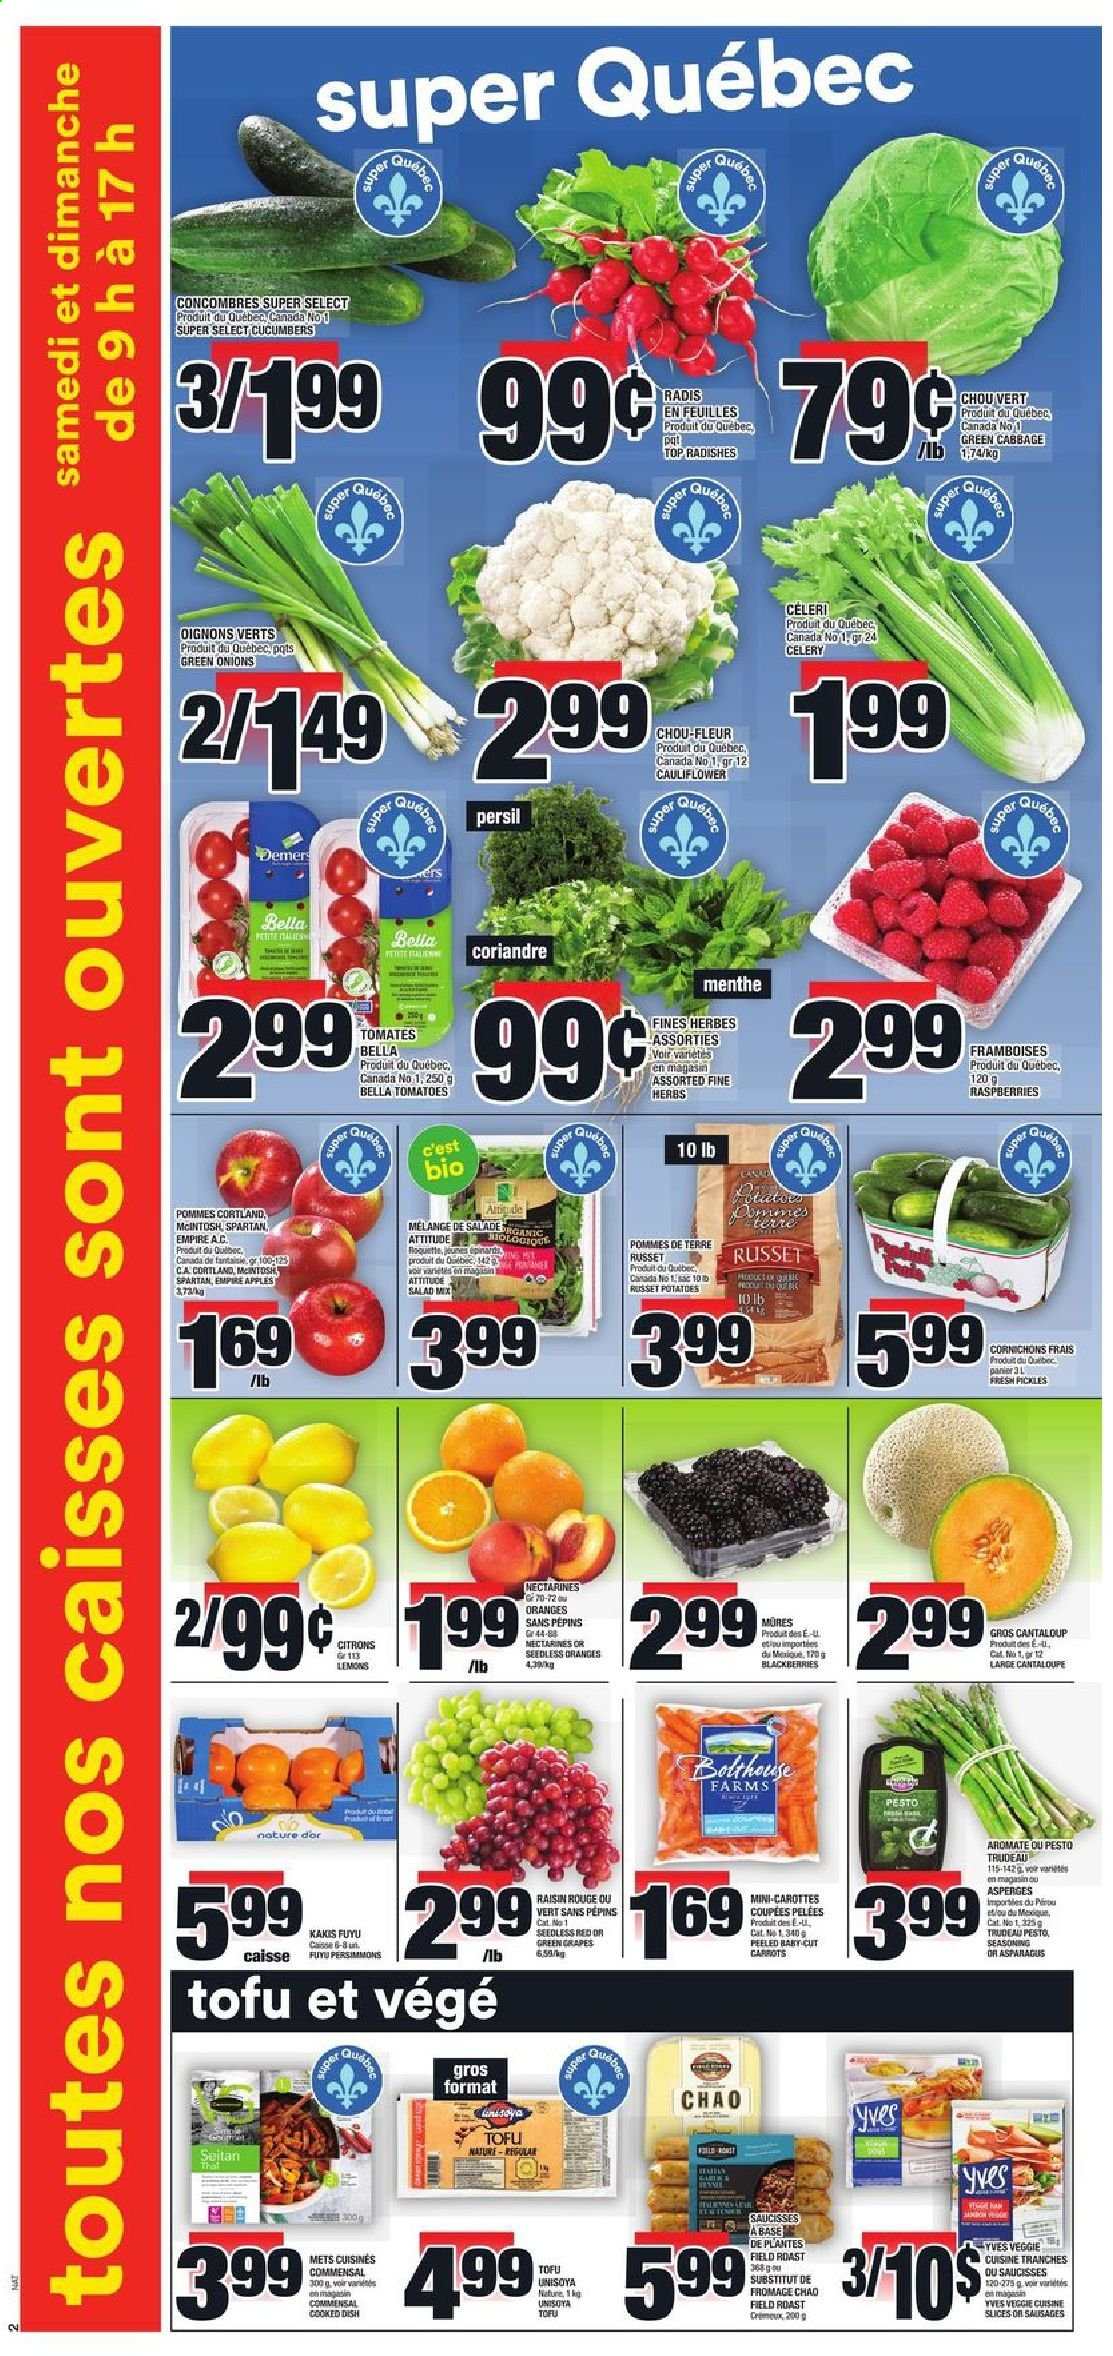 thumbnail - Super C Flyer - July 15, 2021 - July 21, 2021 - Sales products - asparagus, Bella, cabbage, cantaloupe, carrots, cauliflower, celery, radishes, russet potatoes, tomatoes, potatoes, salad, green onion, apples, blackberries, grapes, nectarines, persimmons, lemons, sausage, tofu, pickles, spice, Persil. Page 3.